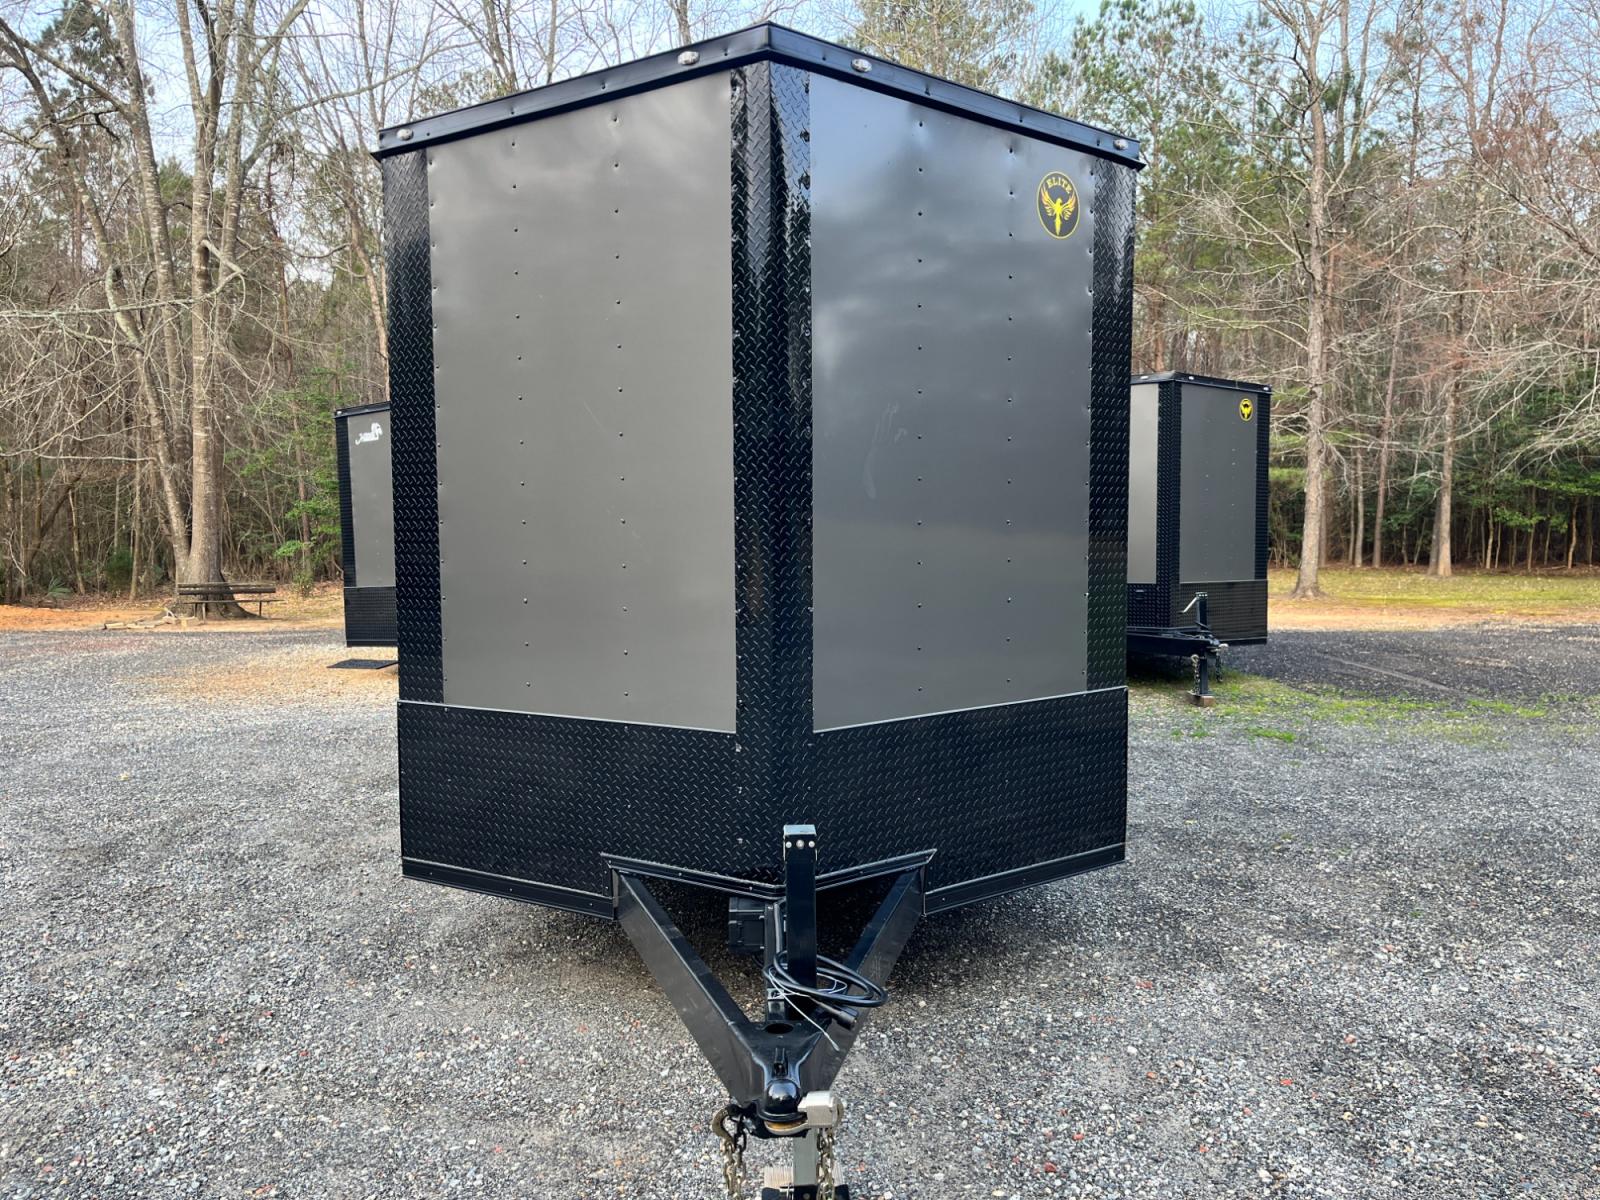 2023 .080 Charcoal Metallic w/Black Out Pkg. Elite Cargo 8.5ft X 24ft Tandem , located at 1330 Rainey Rd., Macon, 31220, (478) 960-1044, 32.845638, -83.778687 - Brand New 2023 Model Elite Cargo Trailer, Made in Tifton, GA 7ft 5" Tall Inside Height This Deluxe Enclosed Car Hauler has Awesome Features! .080 Thick Charcoal Metallic Skin! Awesome "Black Out Trim Package!" 2 Inside LED Dome Lights with Wall Switch! Much Taller Inside, 7ft 5" Tall Inside. Th - Photo #7